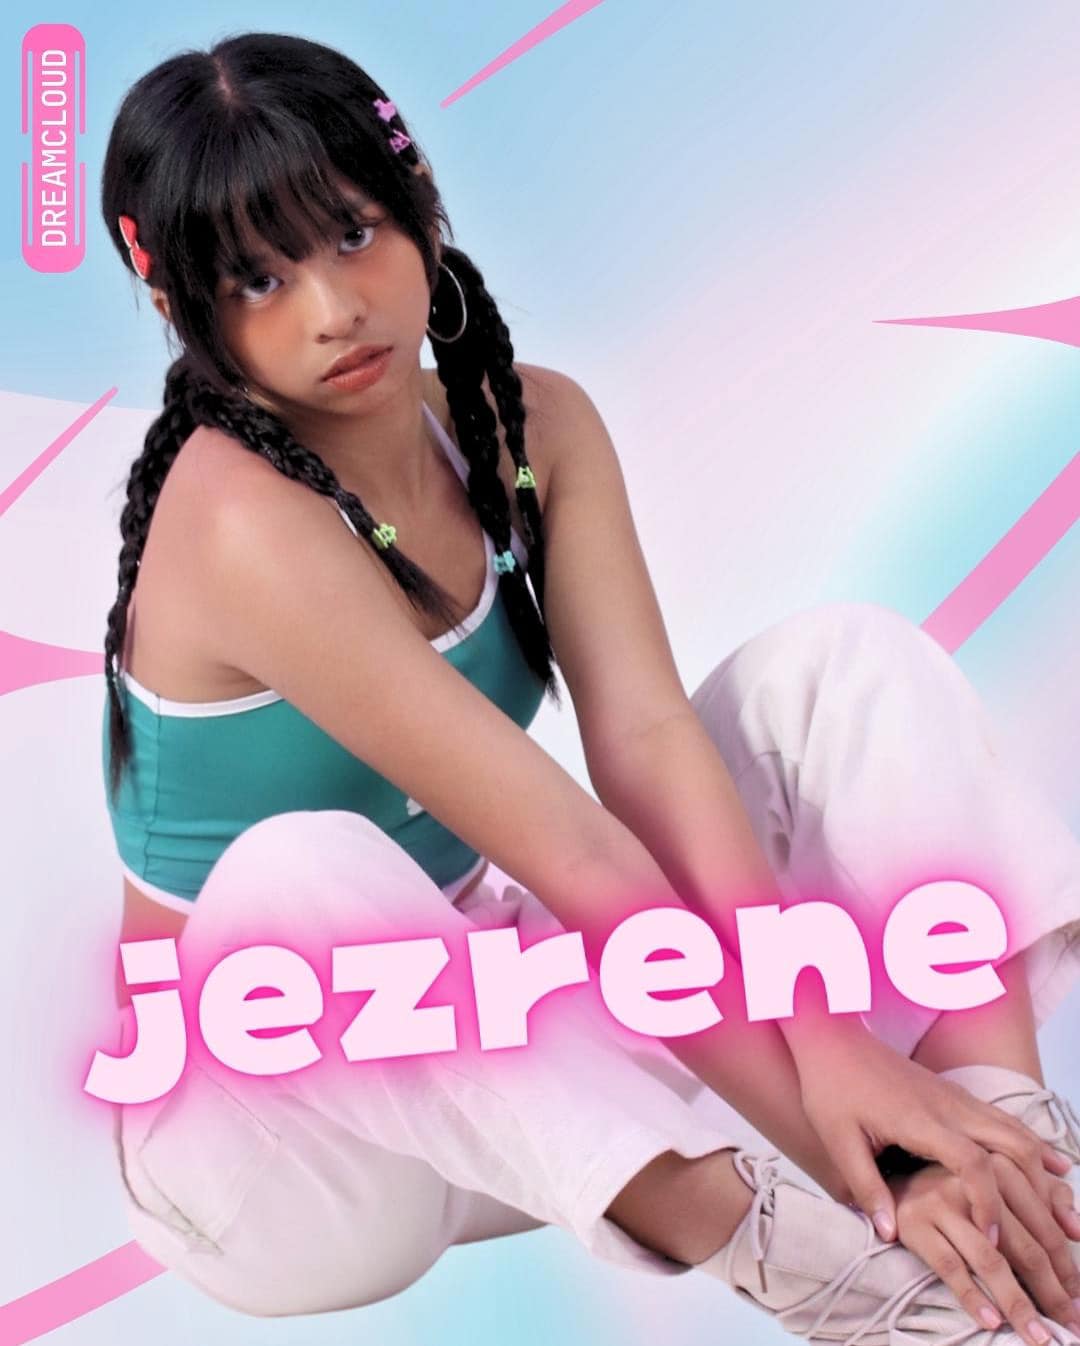 Jezrene of the girl group project